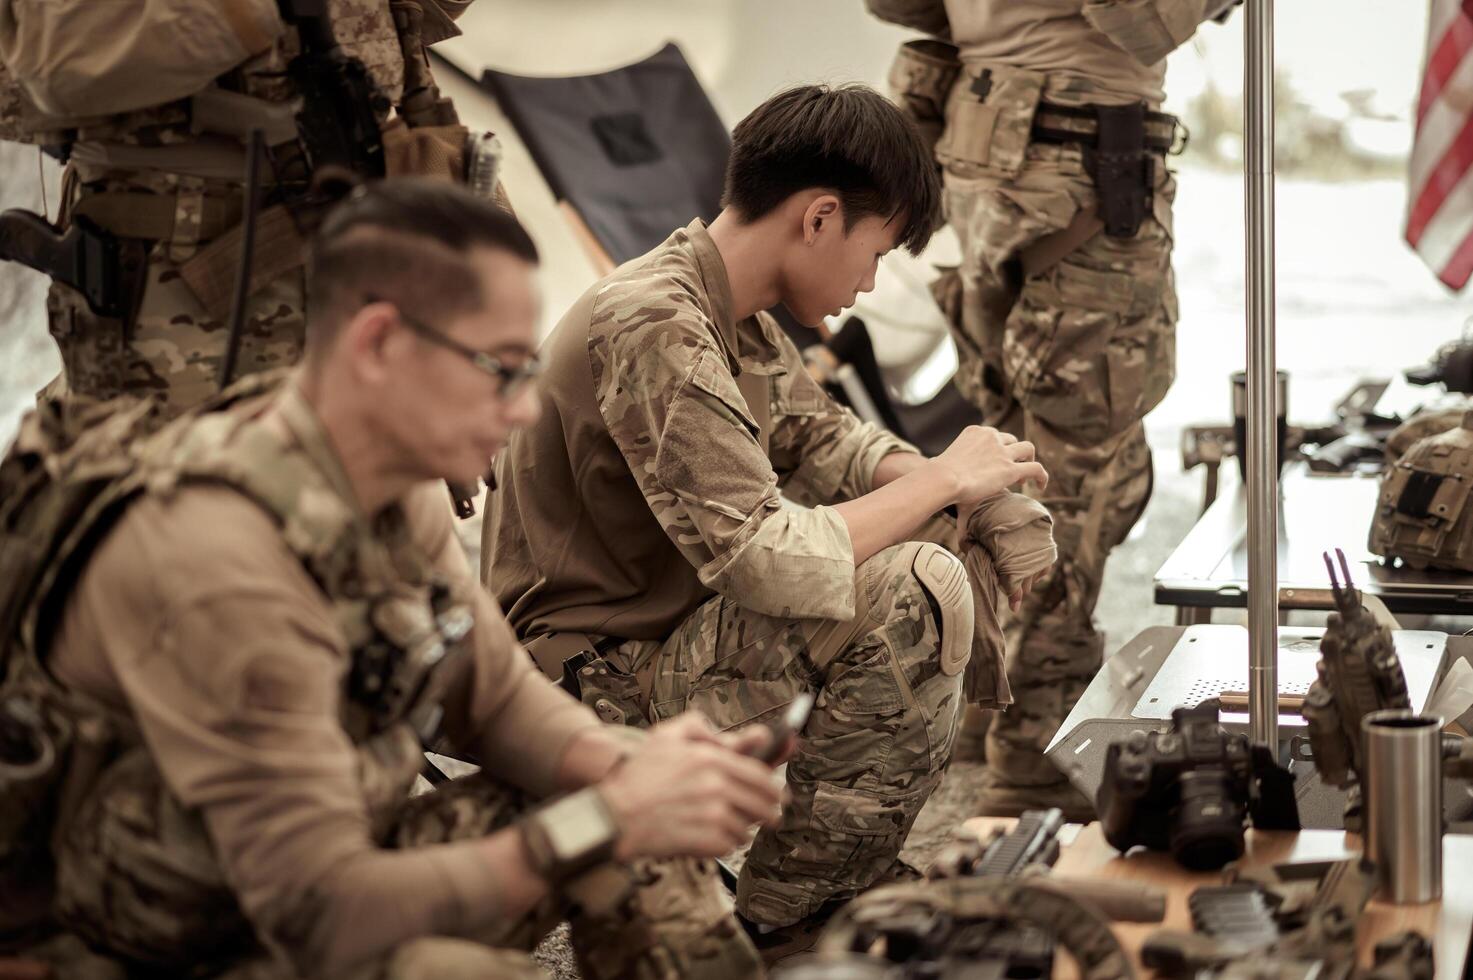 Soldiers in camouflage uniforms planning on operation in the camp, soldiers training in a military operation photo